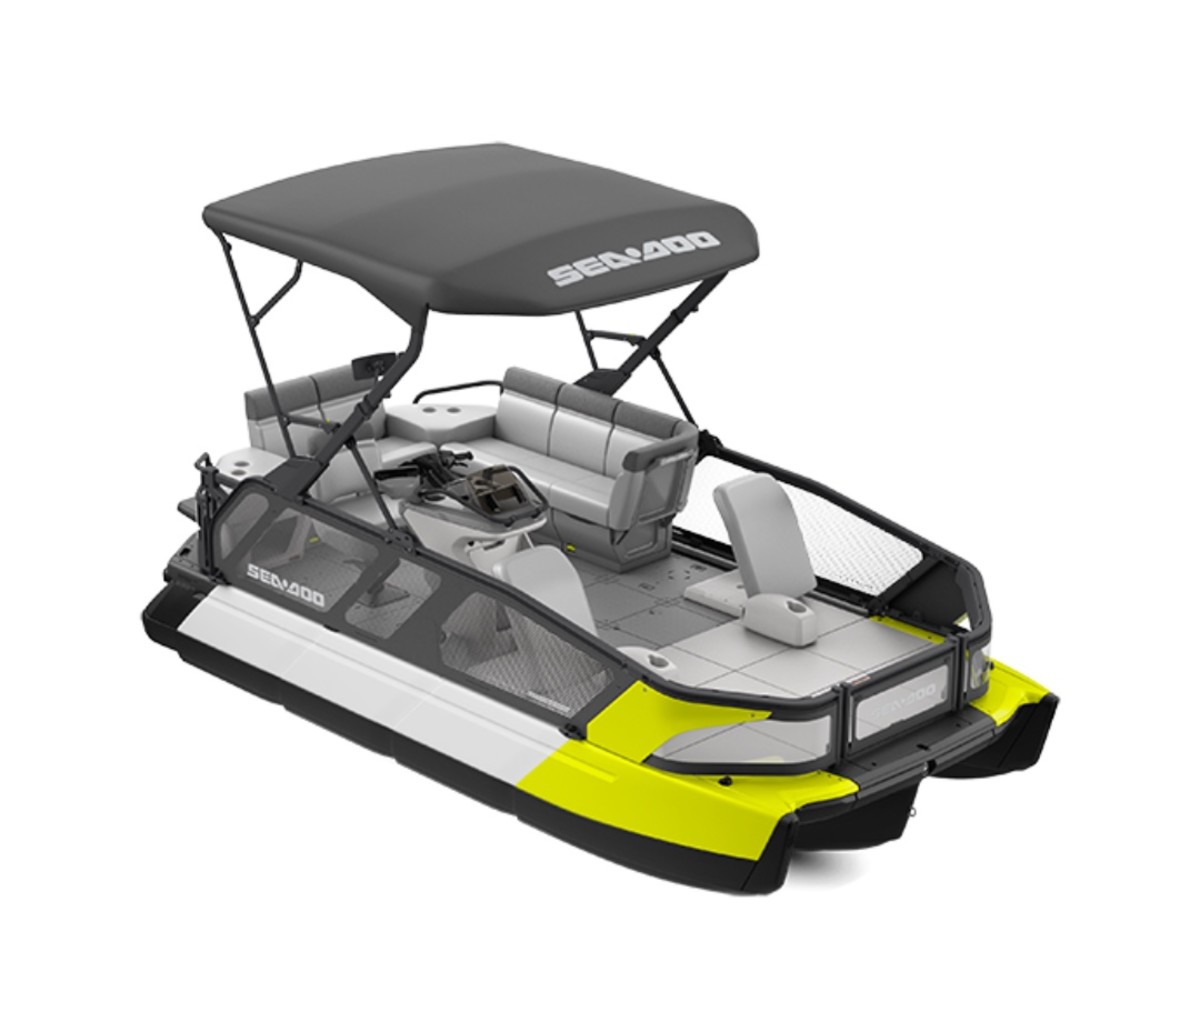 Change your perceptions of what a pontoon boat is with the new Sea-Doo Switch.